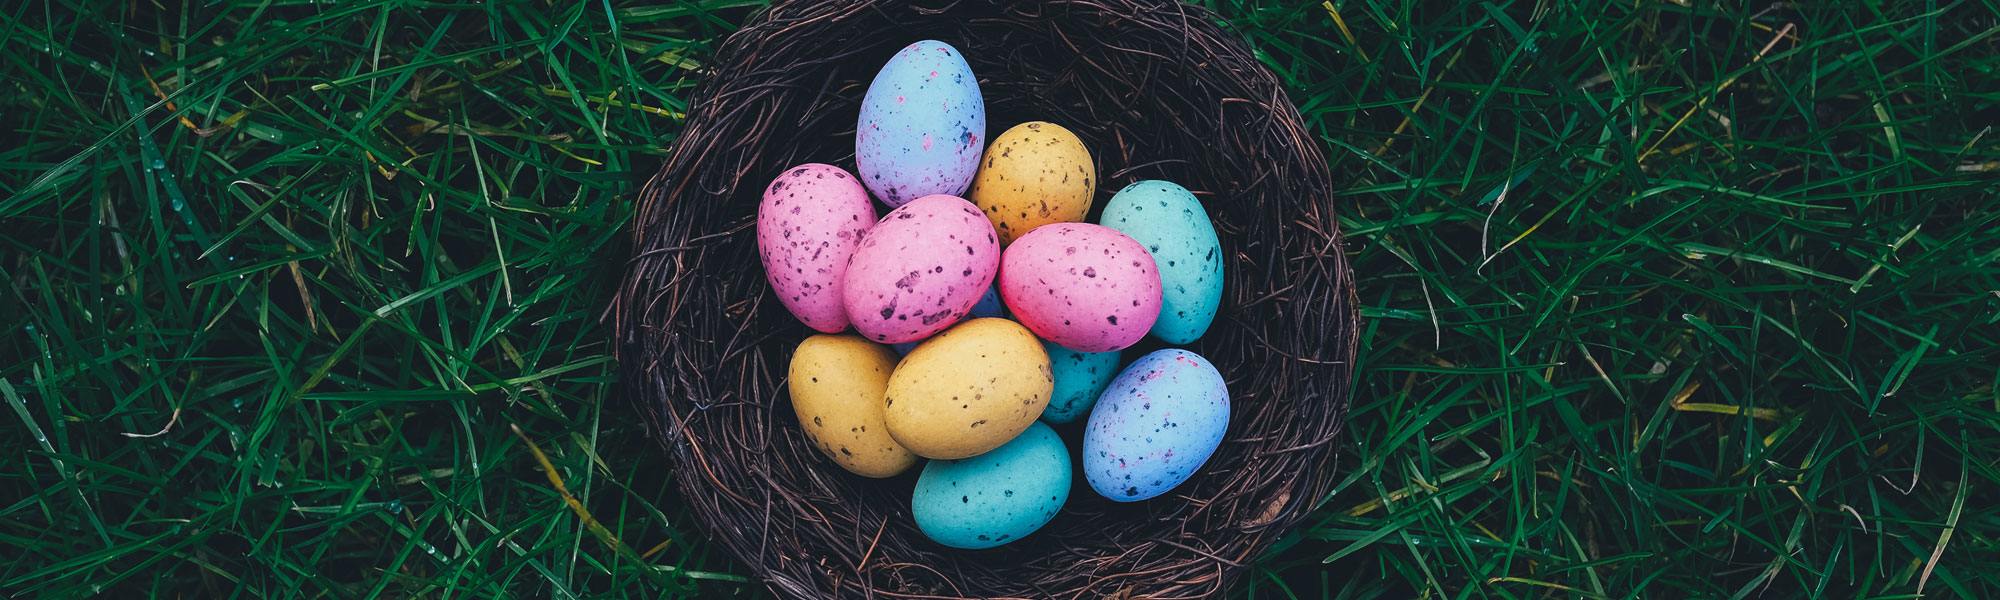 image of Easter eggs